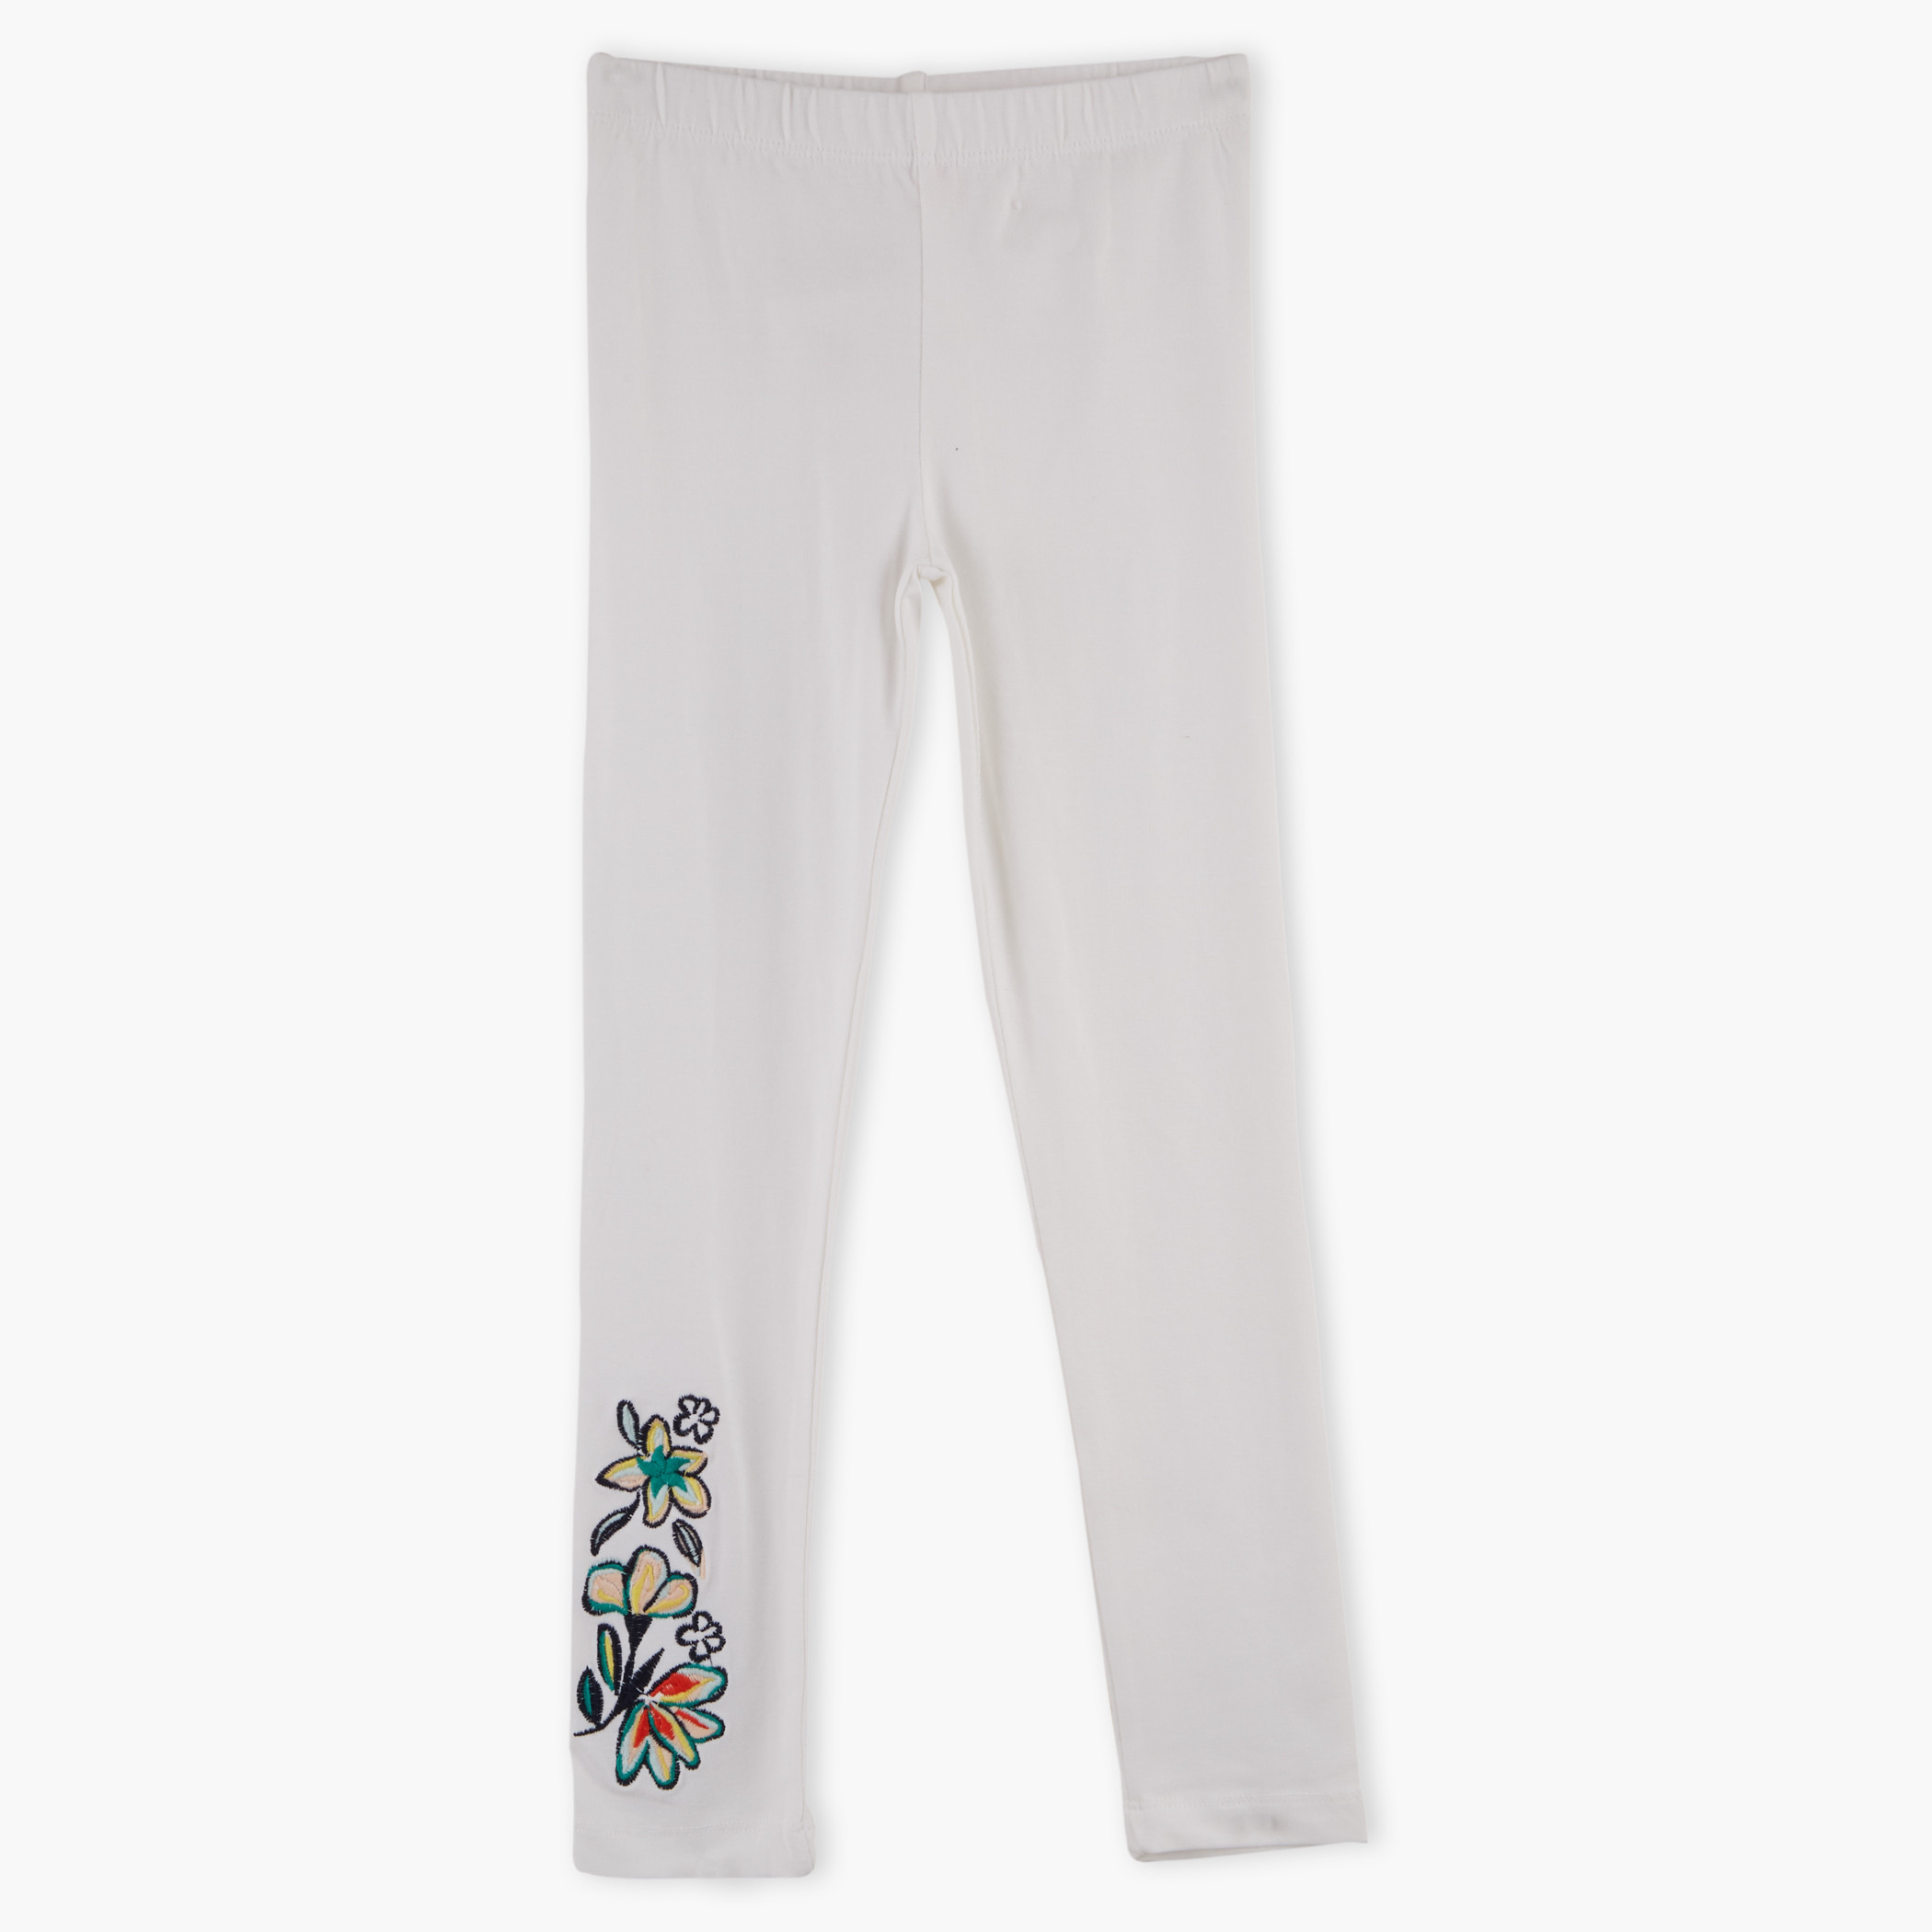 Plus Size Floral Embroidered Tight Pants In DARK GREY | ZAFUL 2023